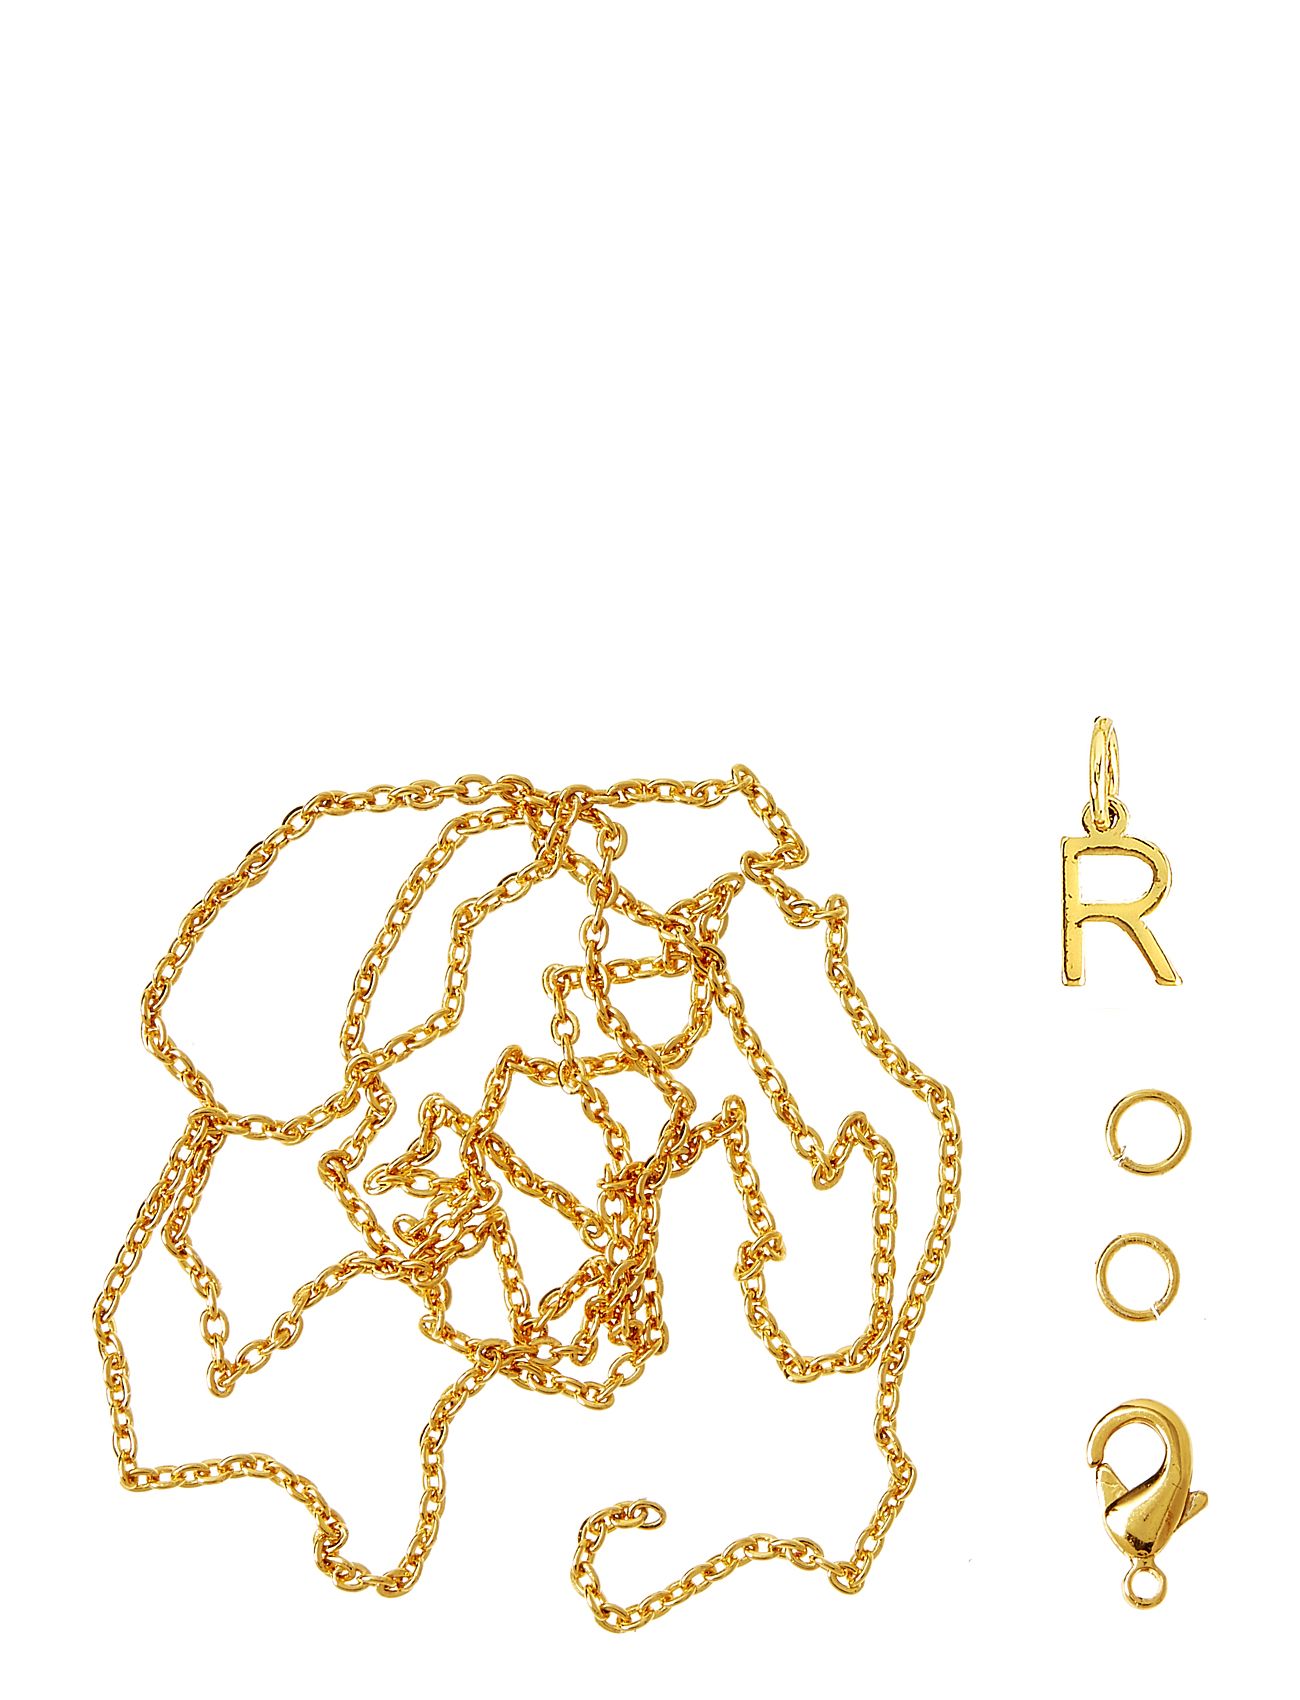 Letter R Gp With O-Ring, Chain And Clasp Toys Creativity Drawing & Crafts Craft Jewellery & Accessories Gold Me & My Box